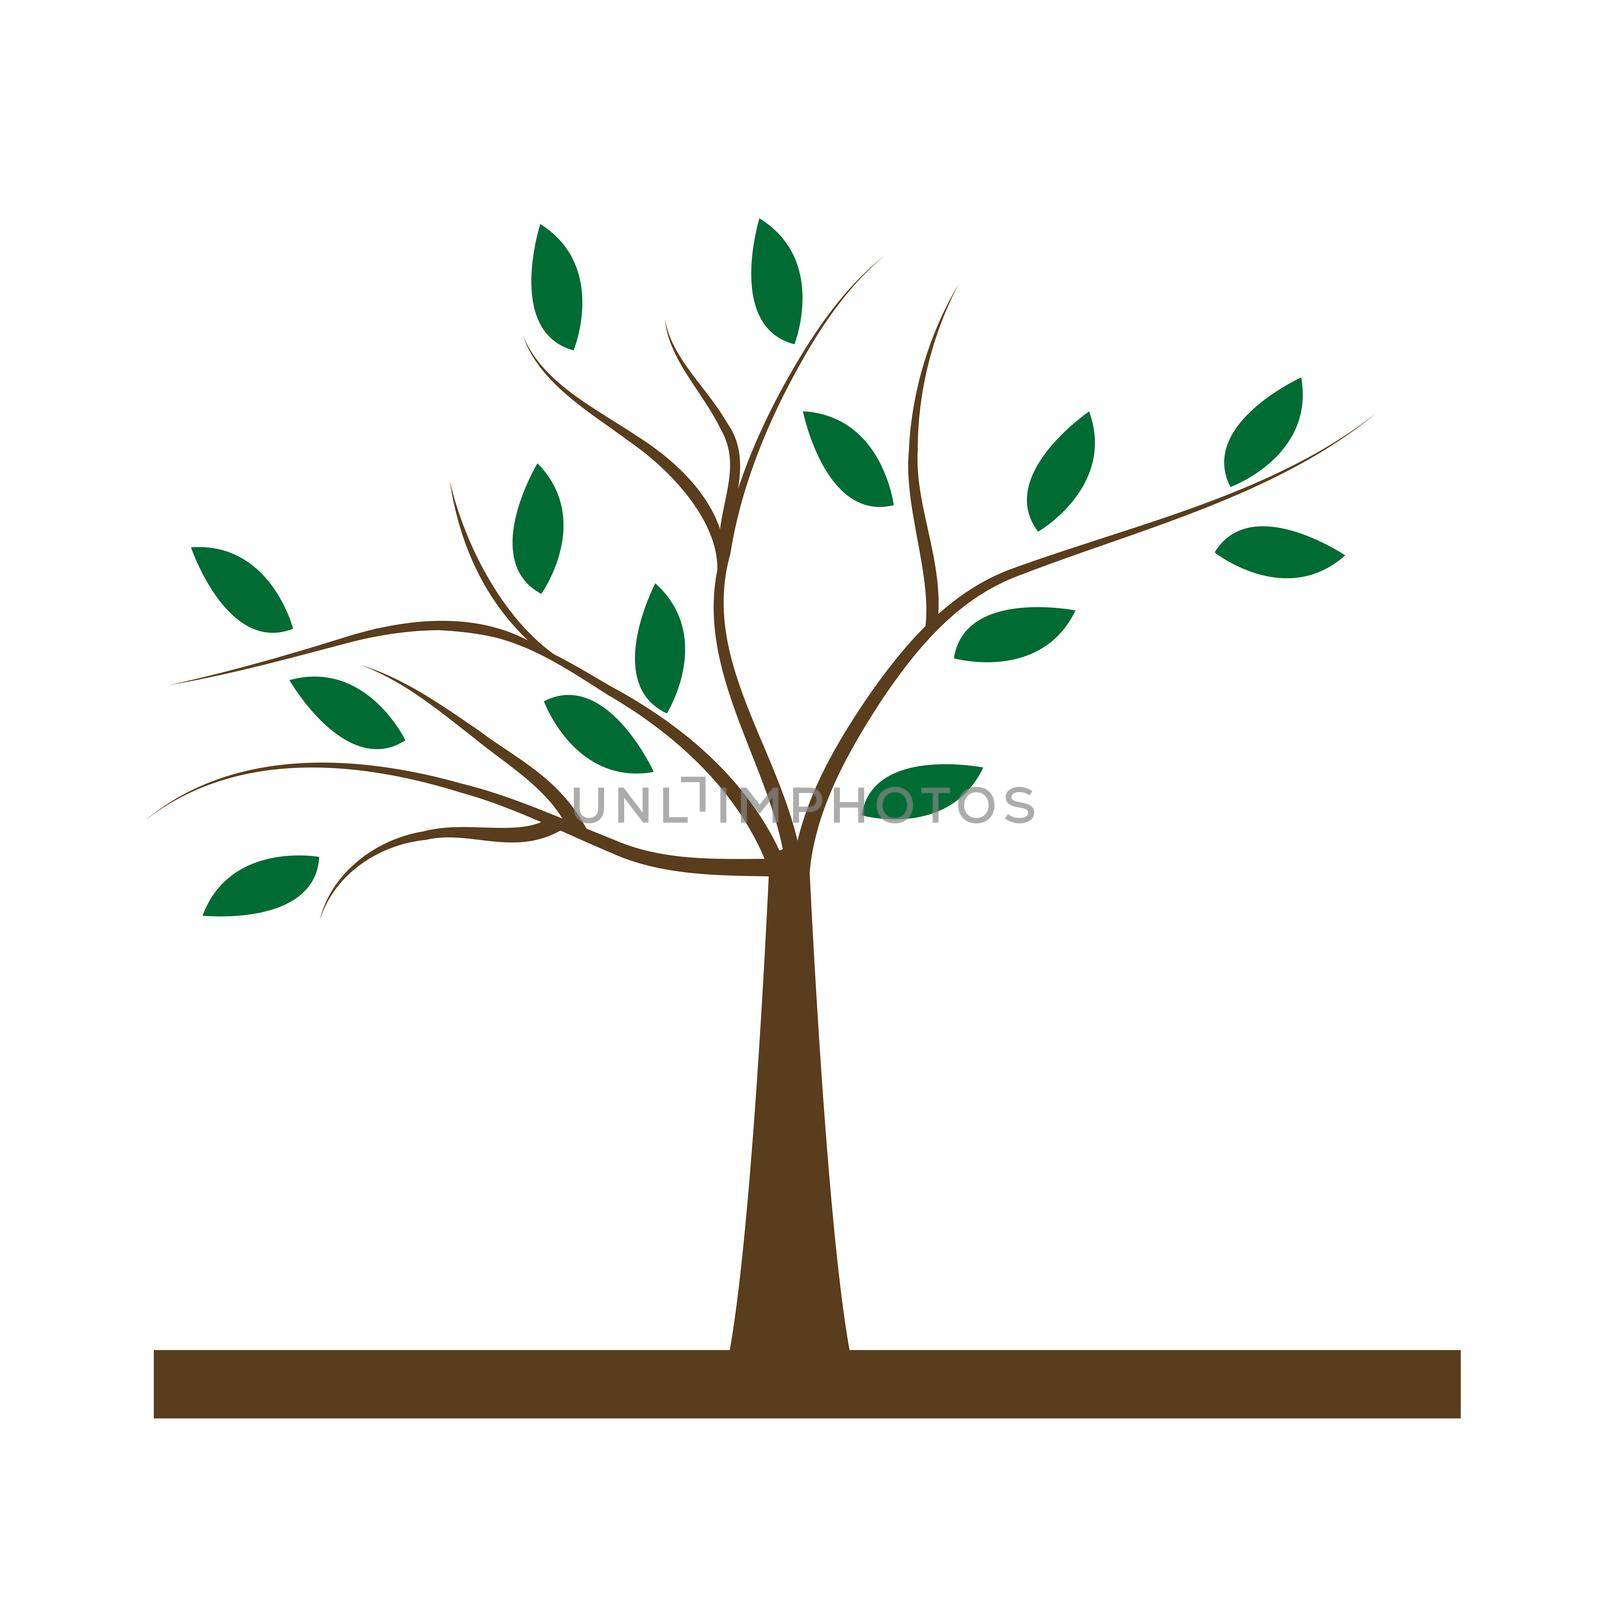 Simple flat icon of a tree by hibrida13